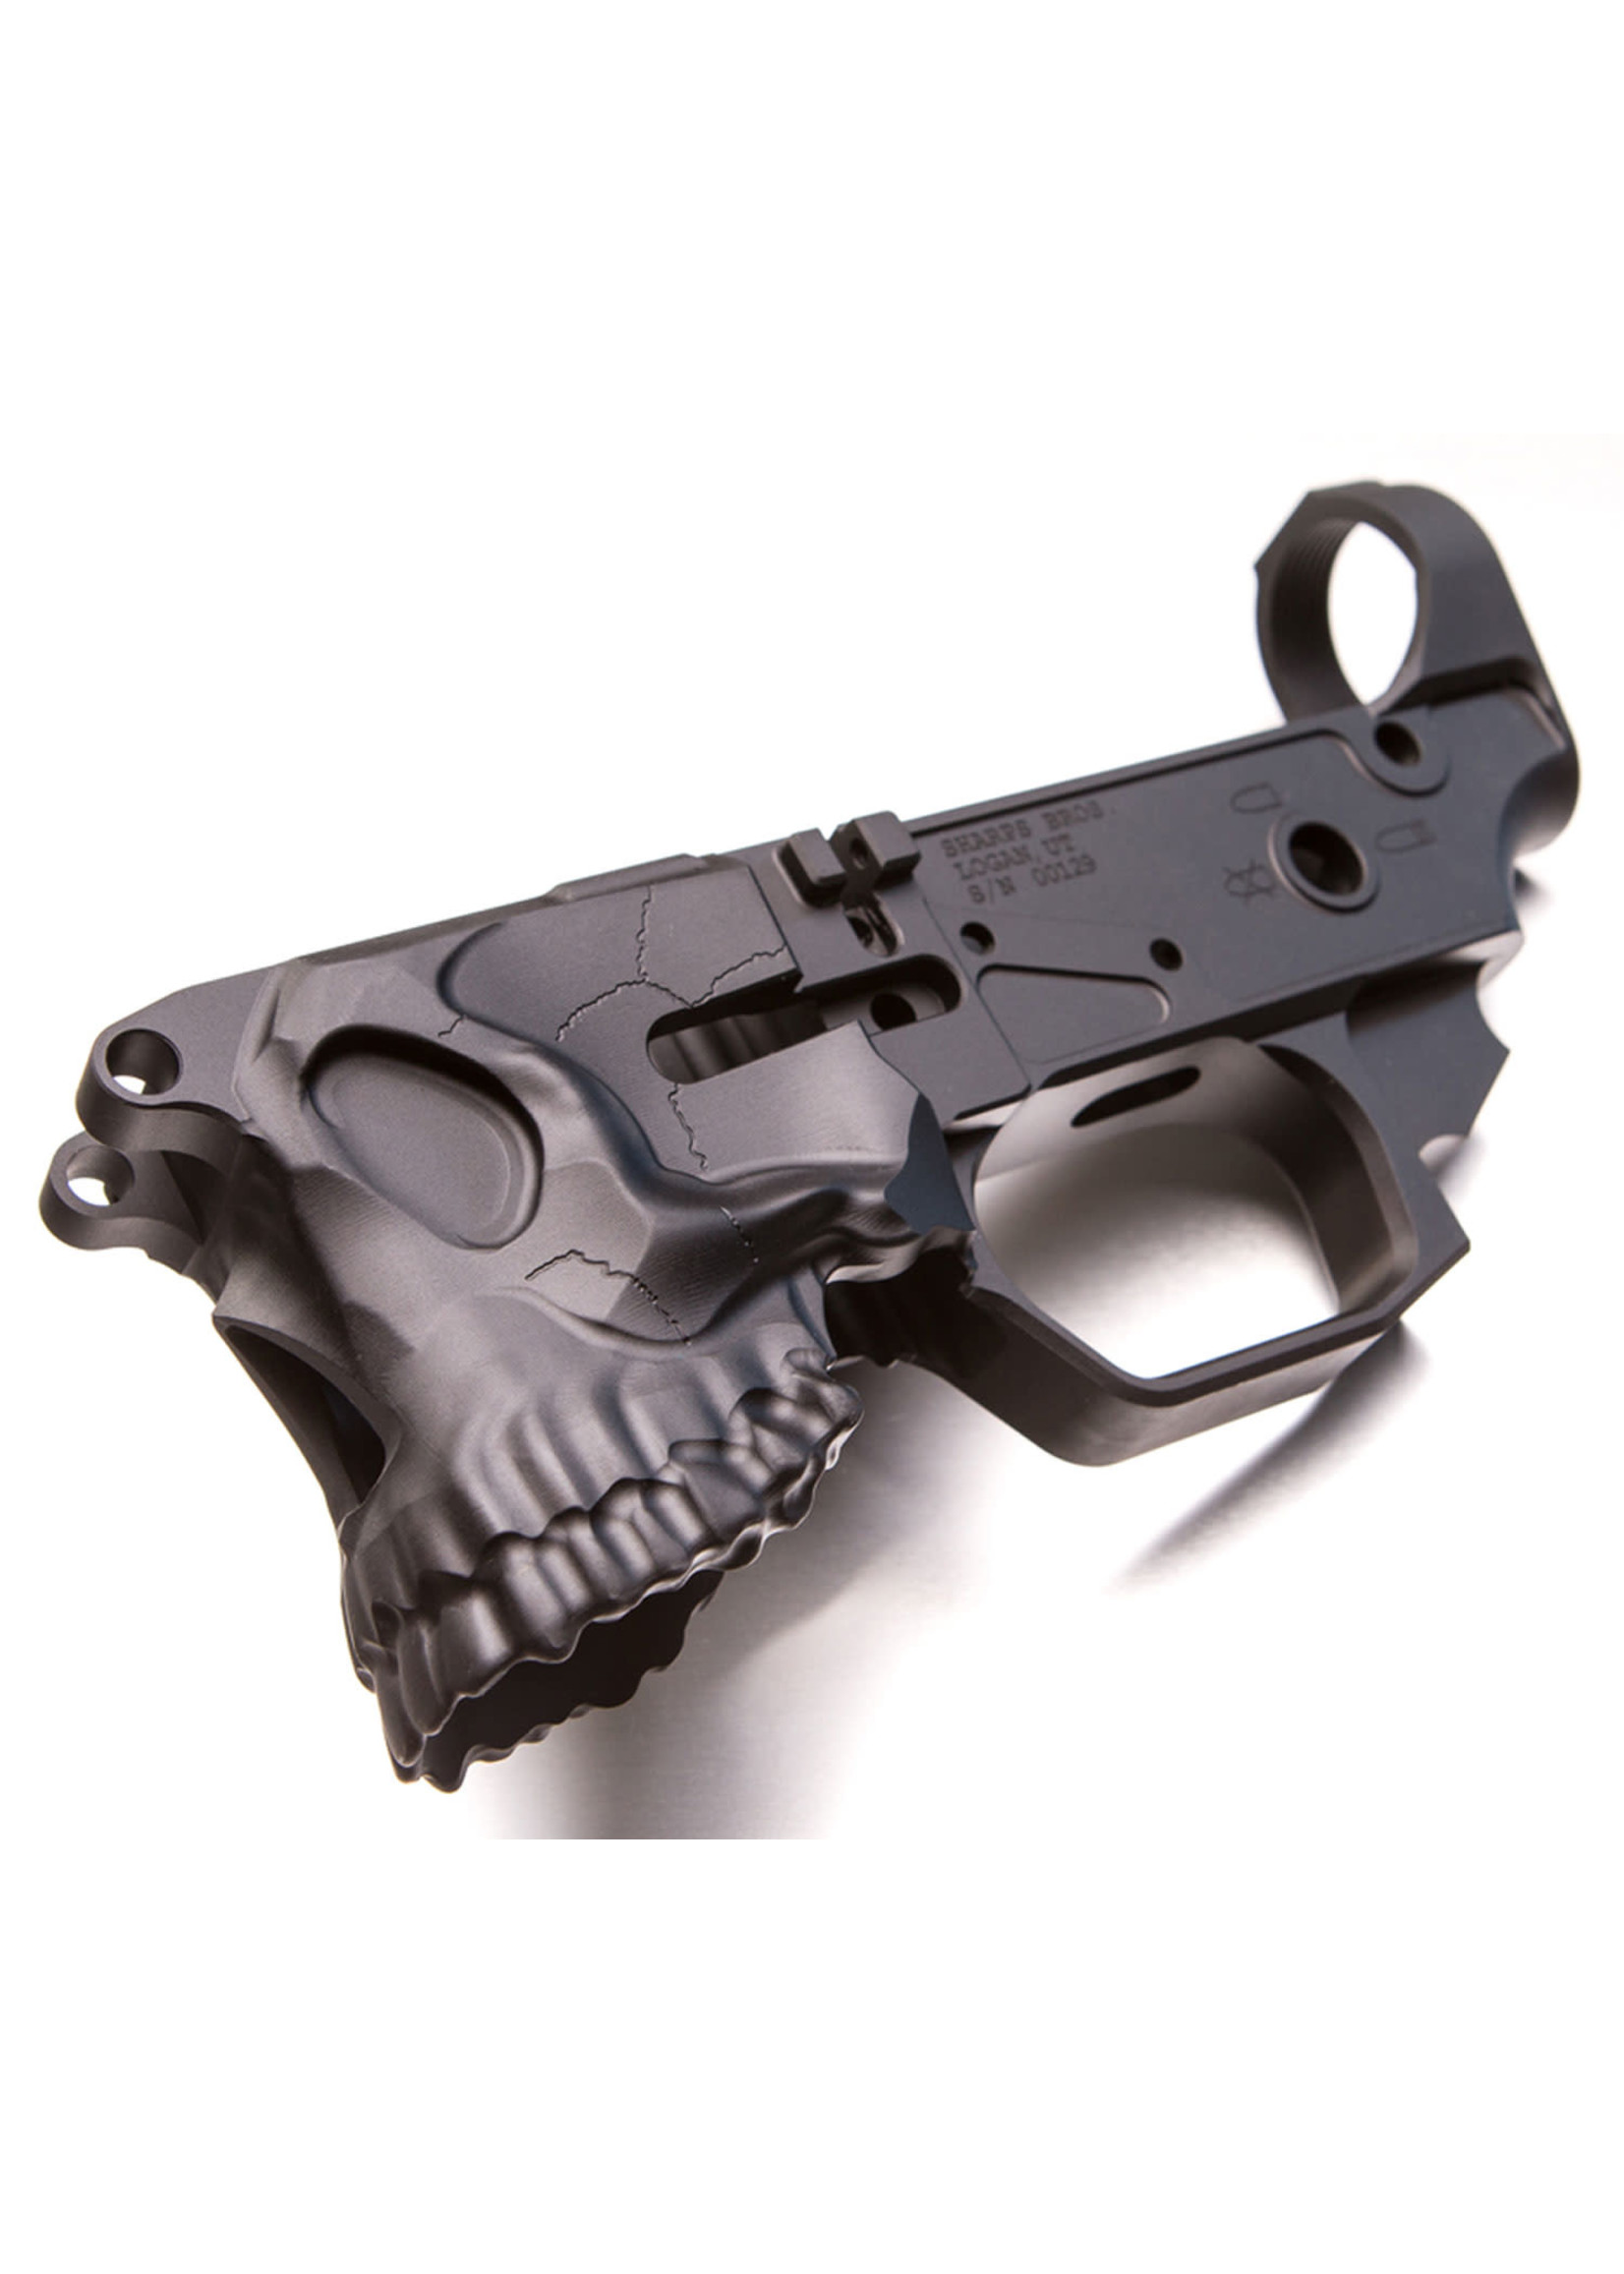 Sharps Bros Mfg Sharps Bros The Jack Stripped Lower Multi-Caliber Black Anodized Finish 7075-T6 Aluminum Material Compatible with Mil-Spec Parts for AR-15